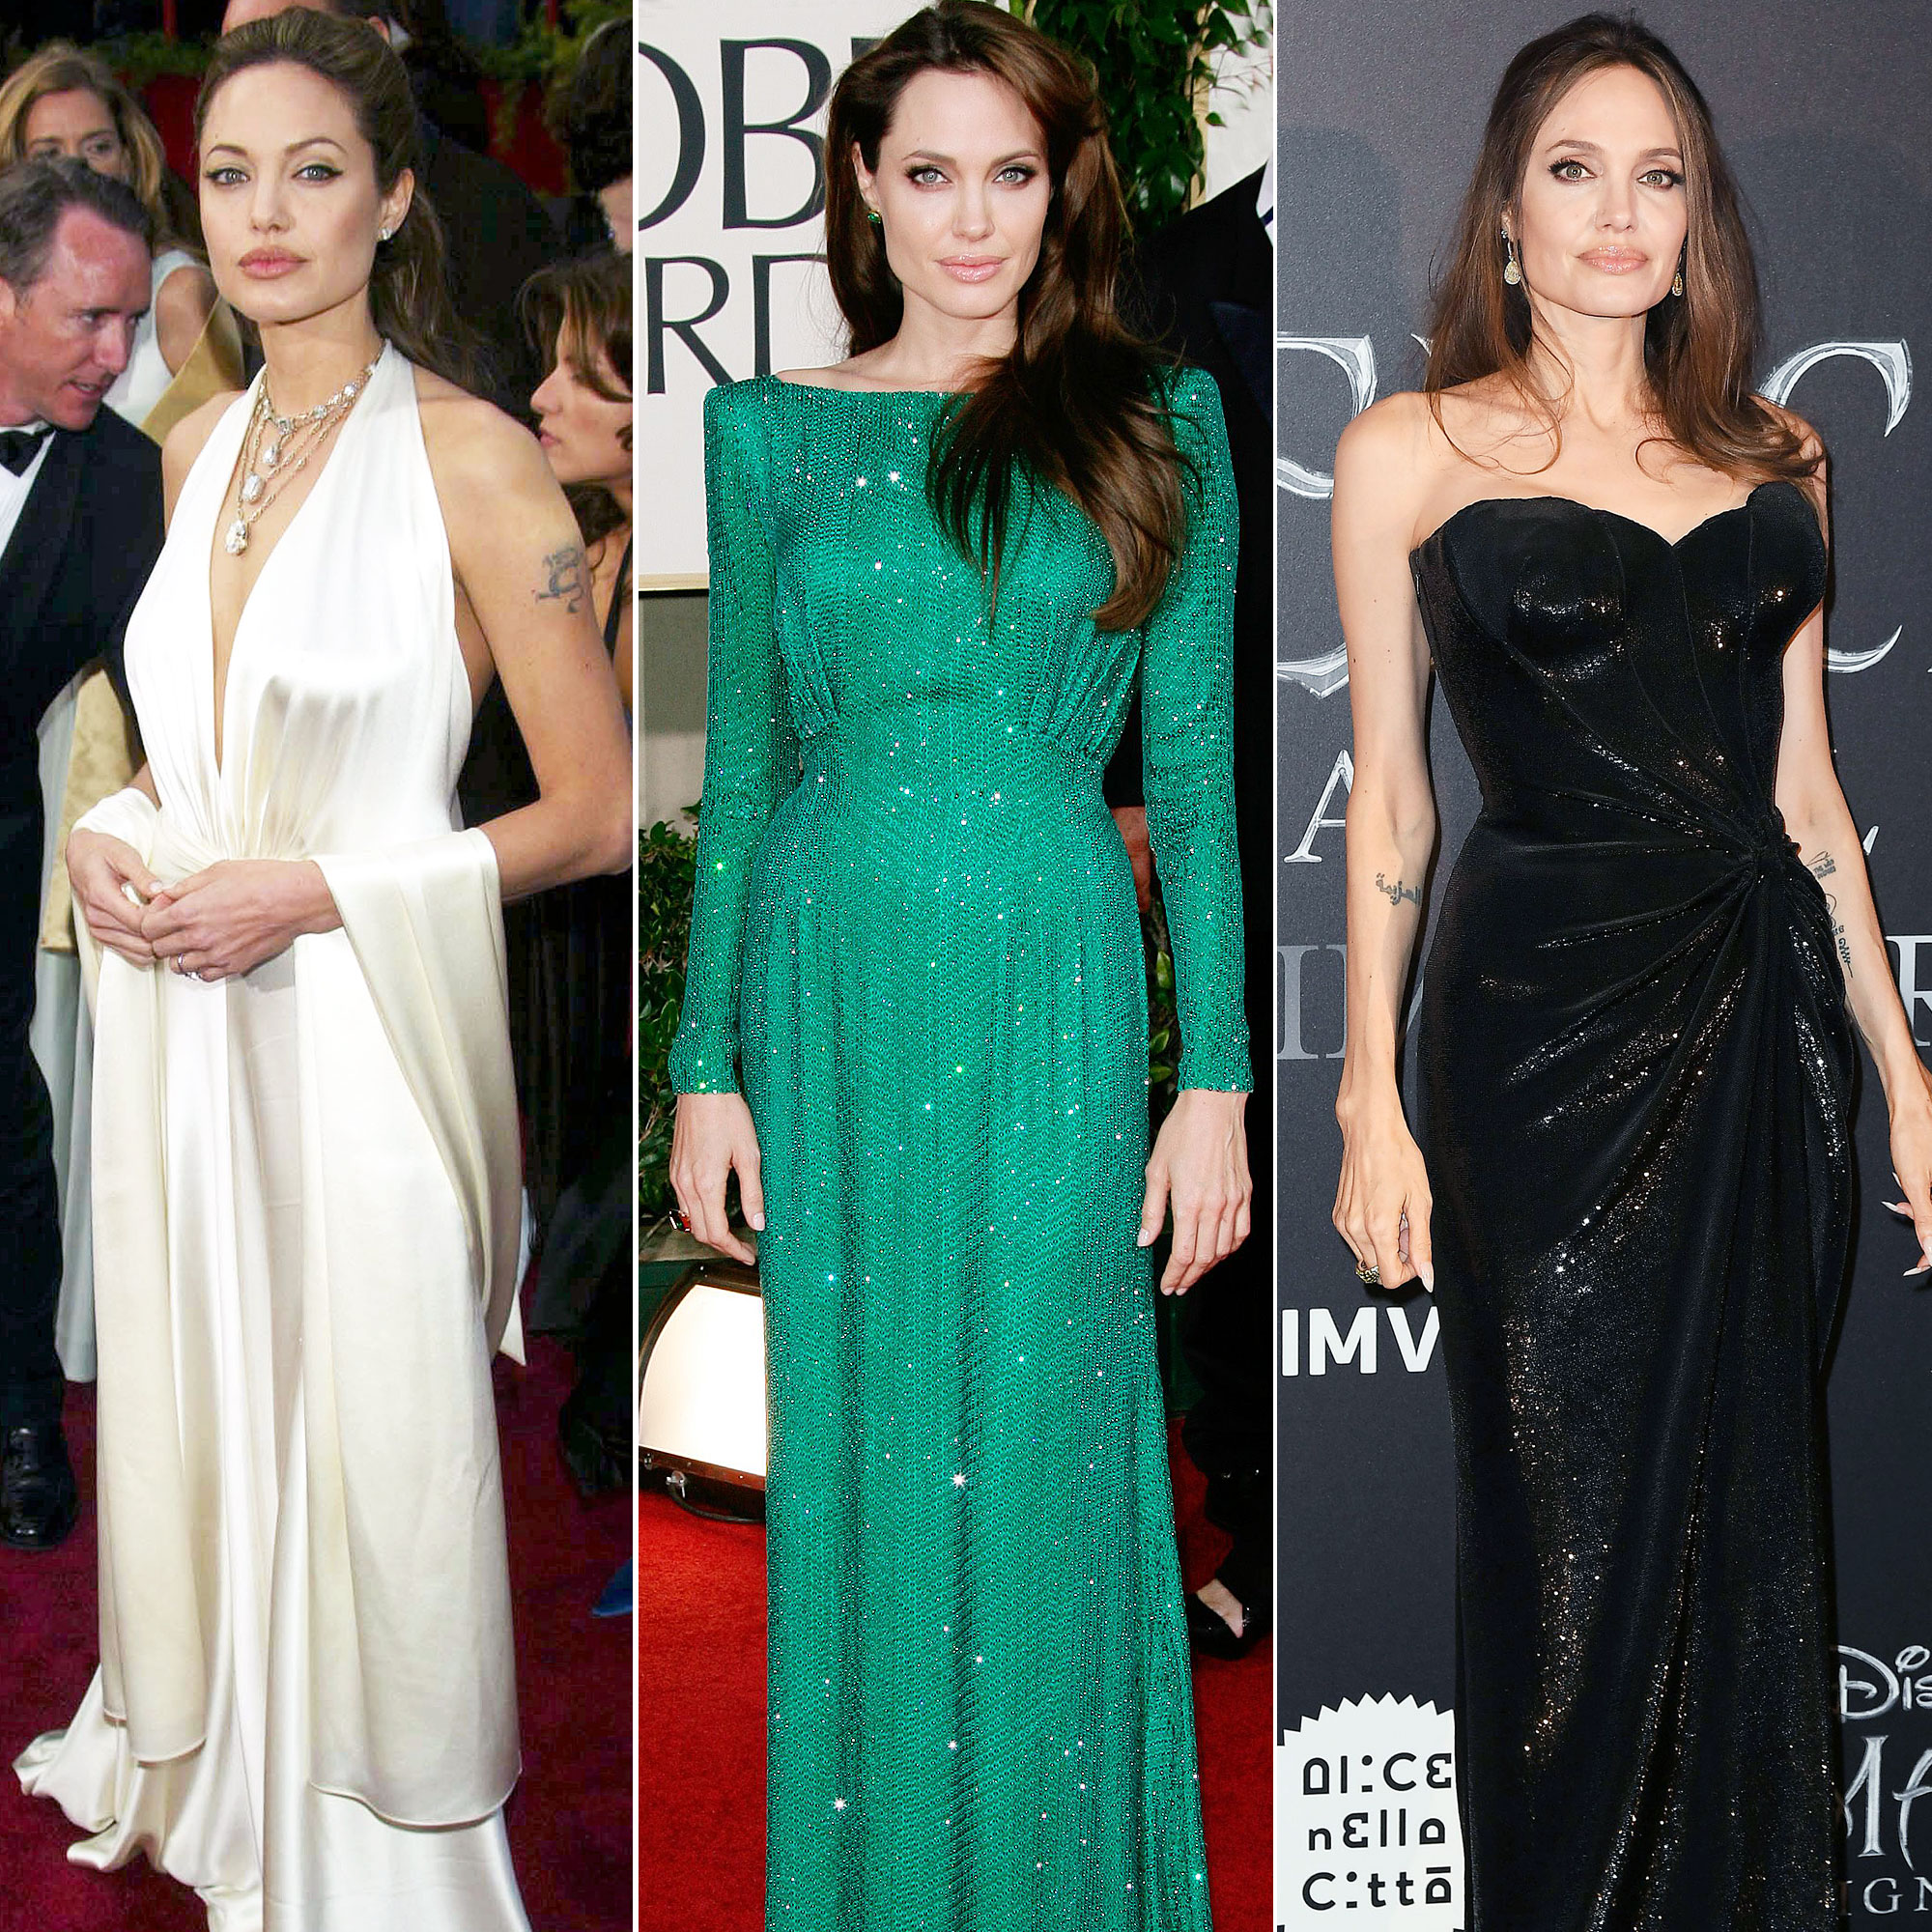 The 25 Most Iconic Red-Carpet Dresses of All Time